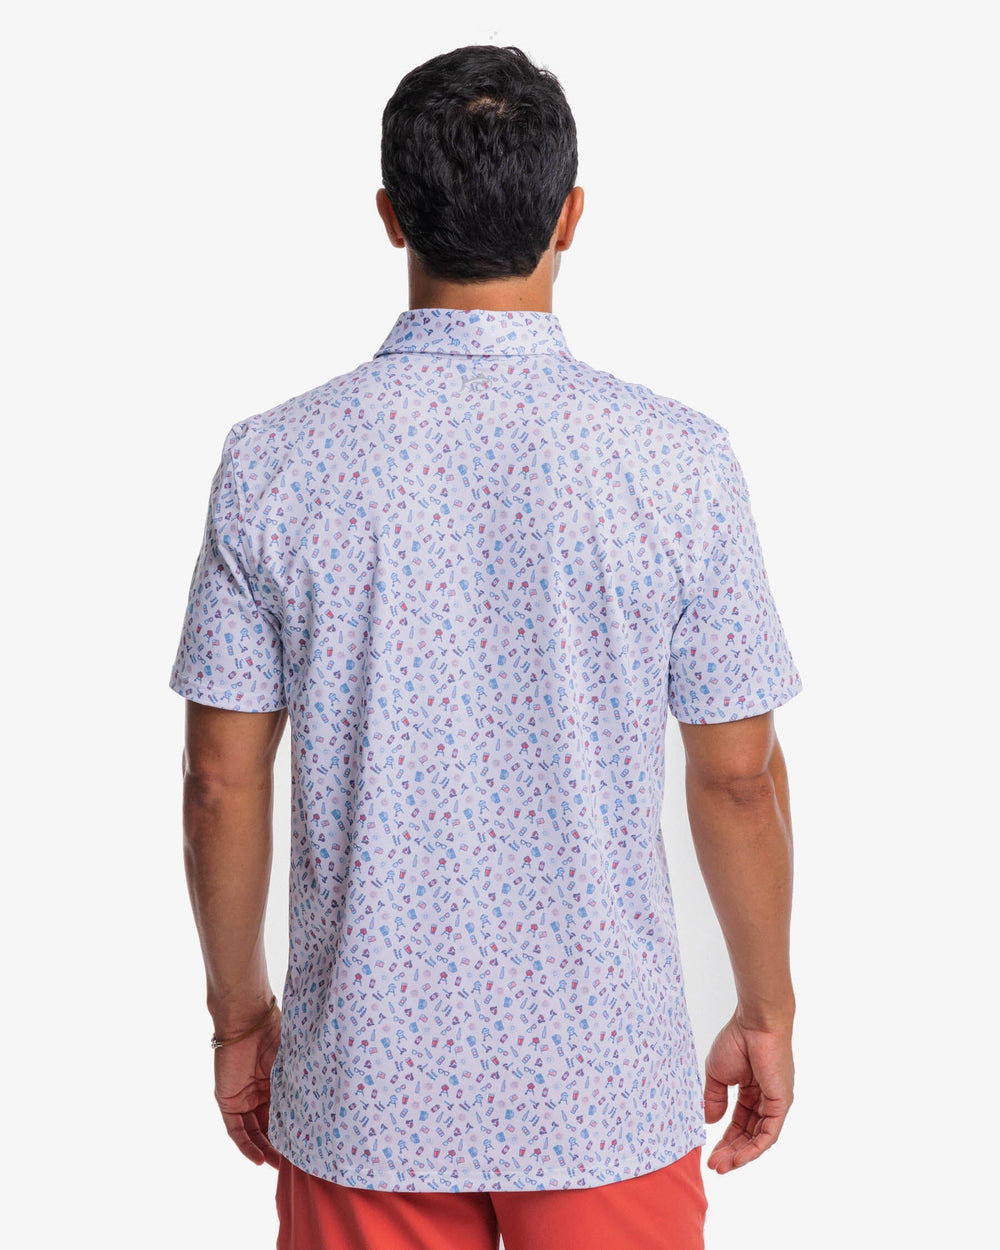 The back view of the Southern Tide Backyard BBQ Polo Shirt by Southern Tide - Classic White